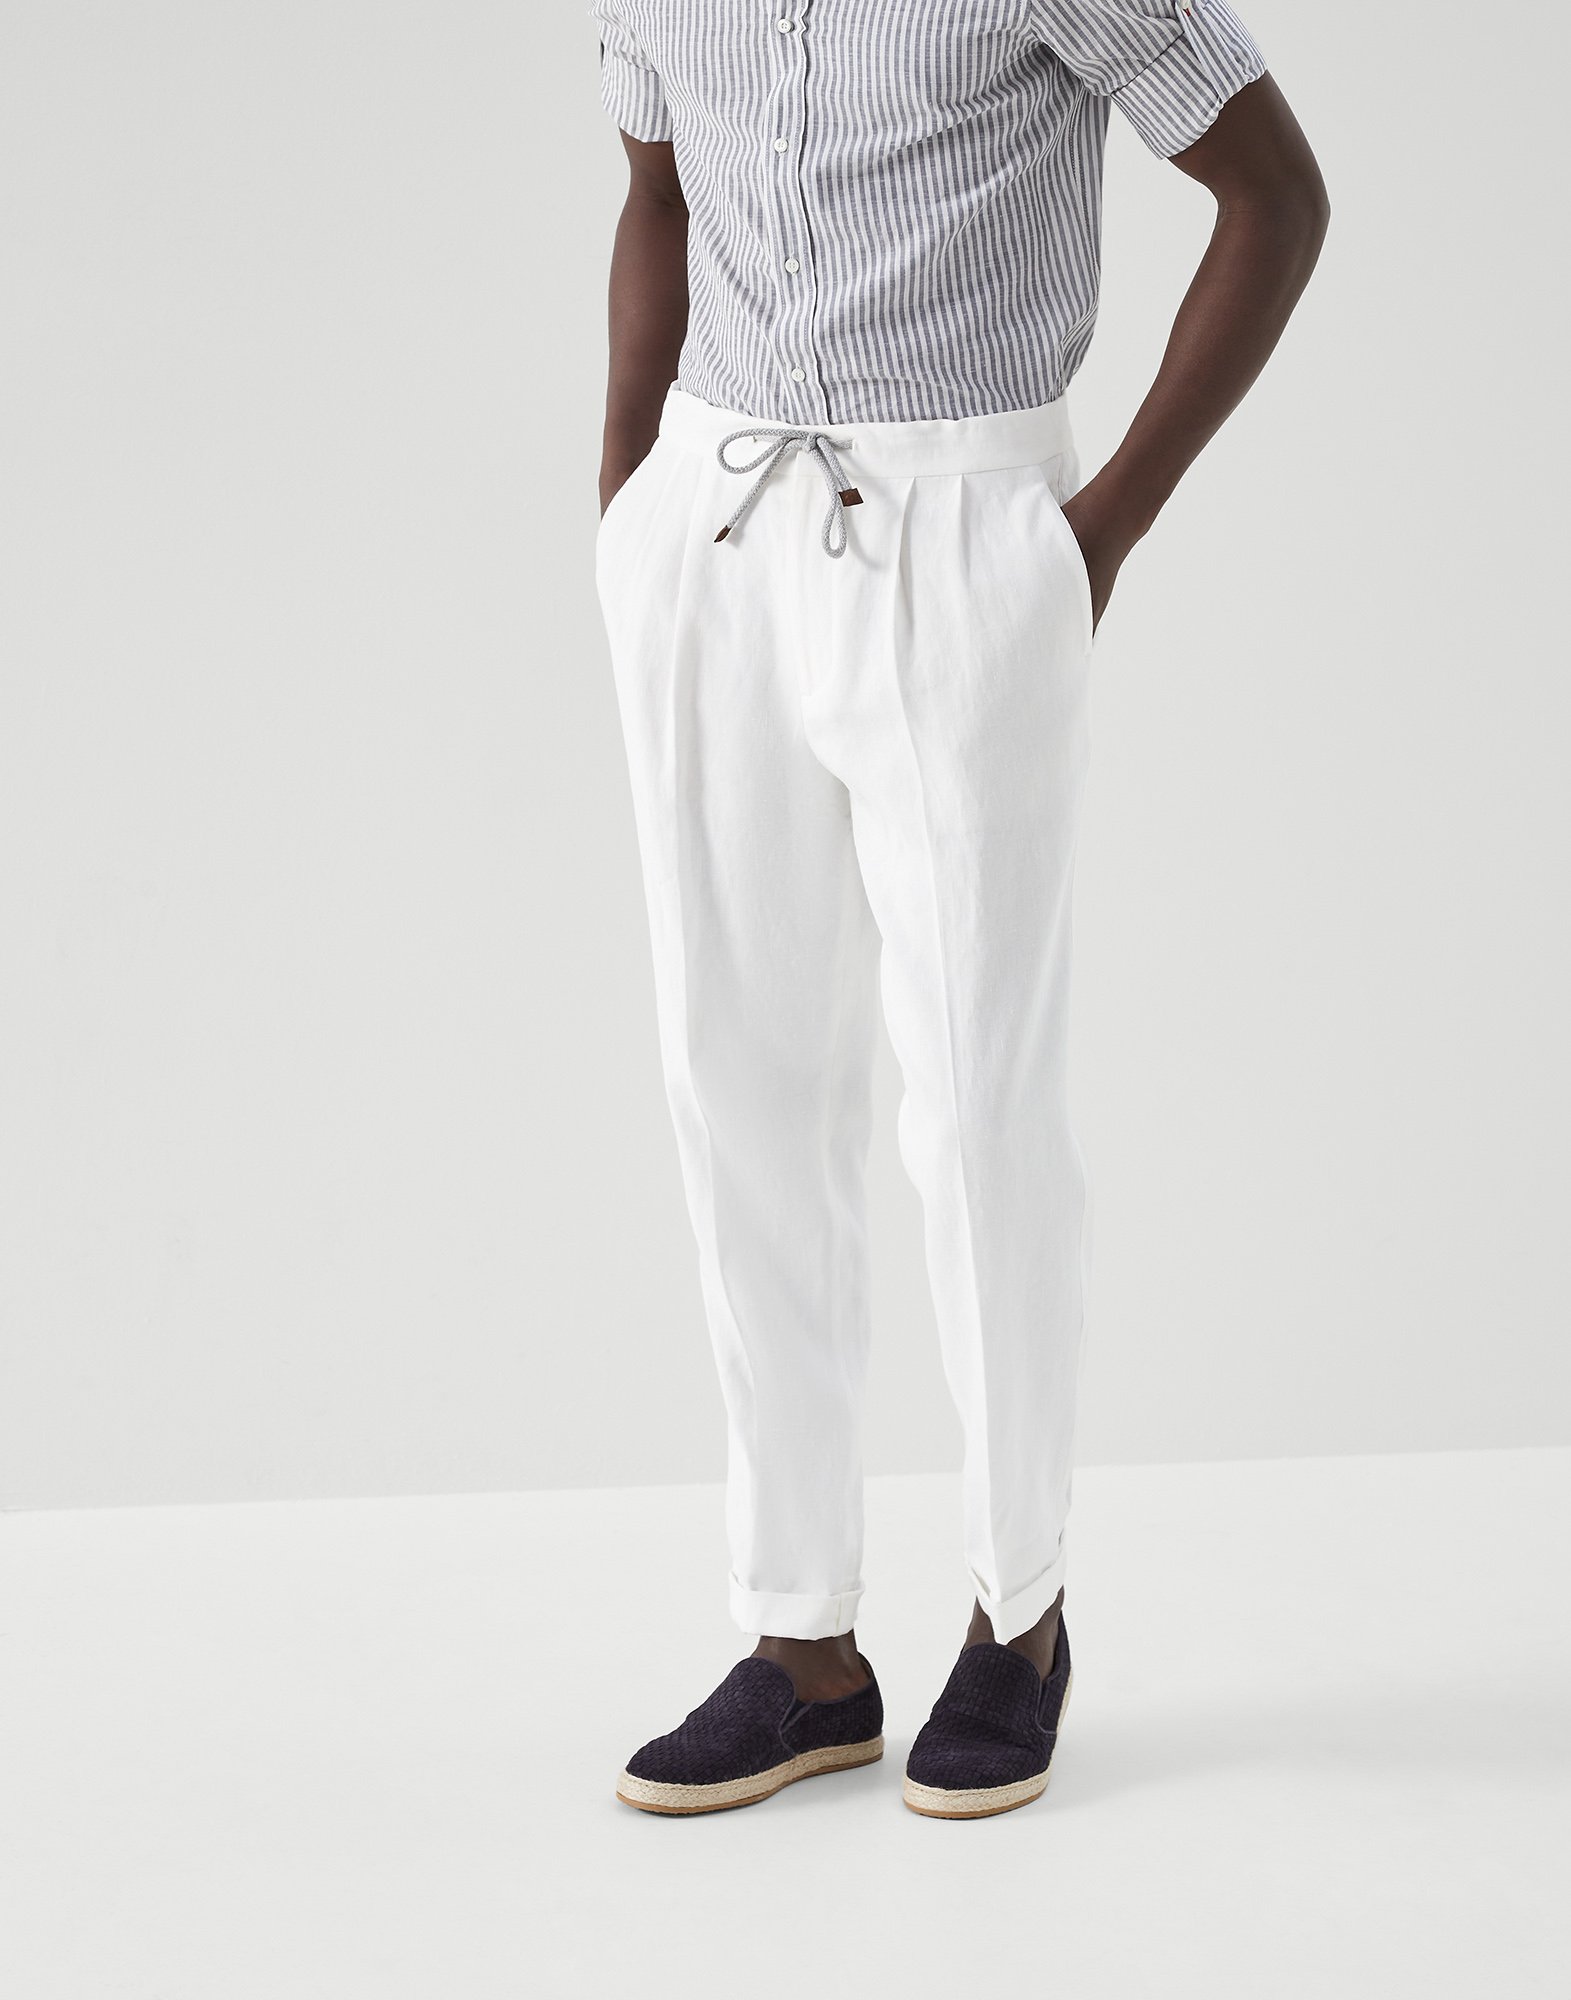 Trousers with double pleats and drawstring